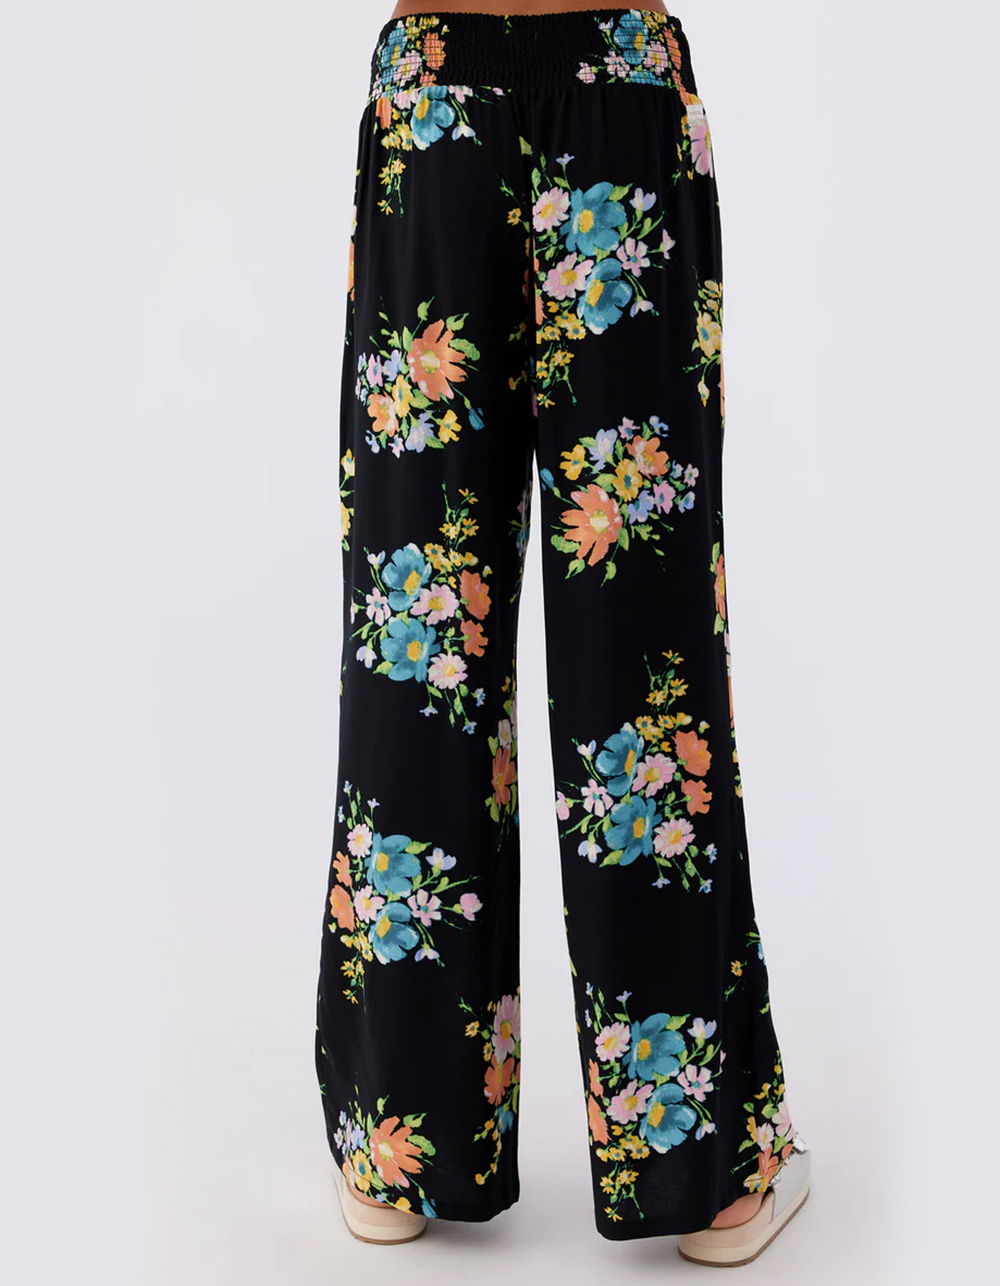 O'NEILL Tommie Girls Floral Pants - BLACK COMBO | Tillys